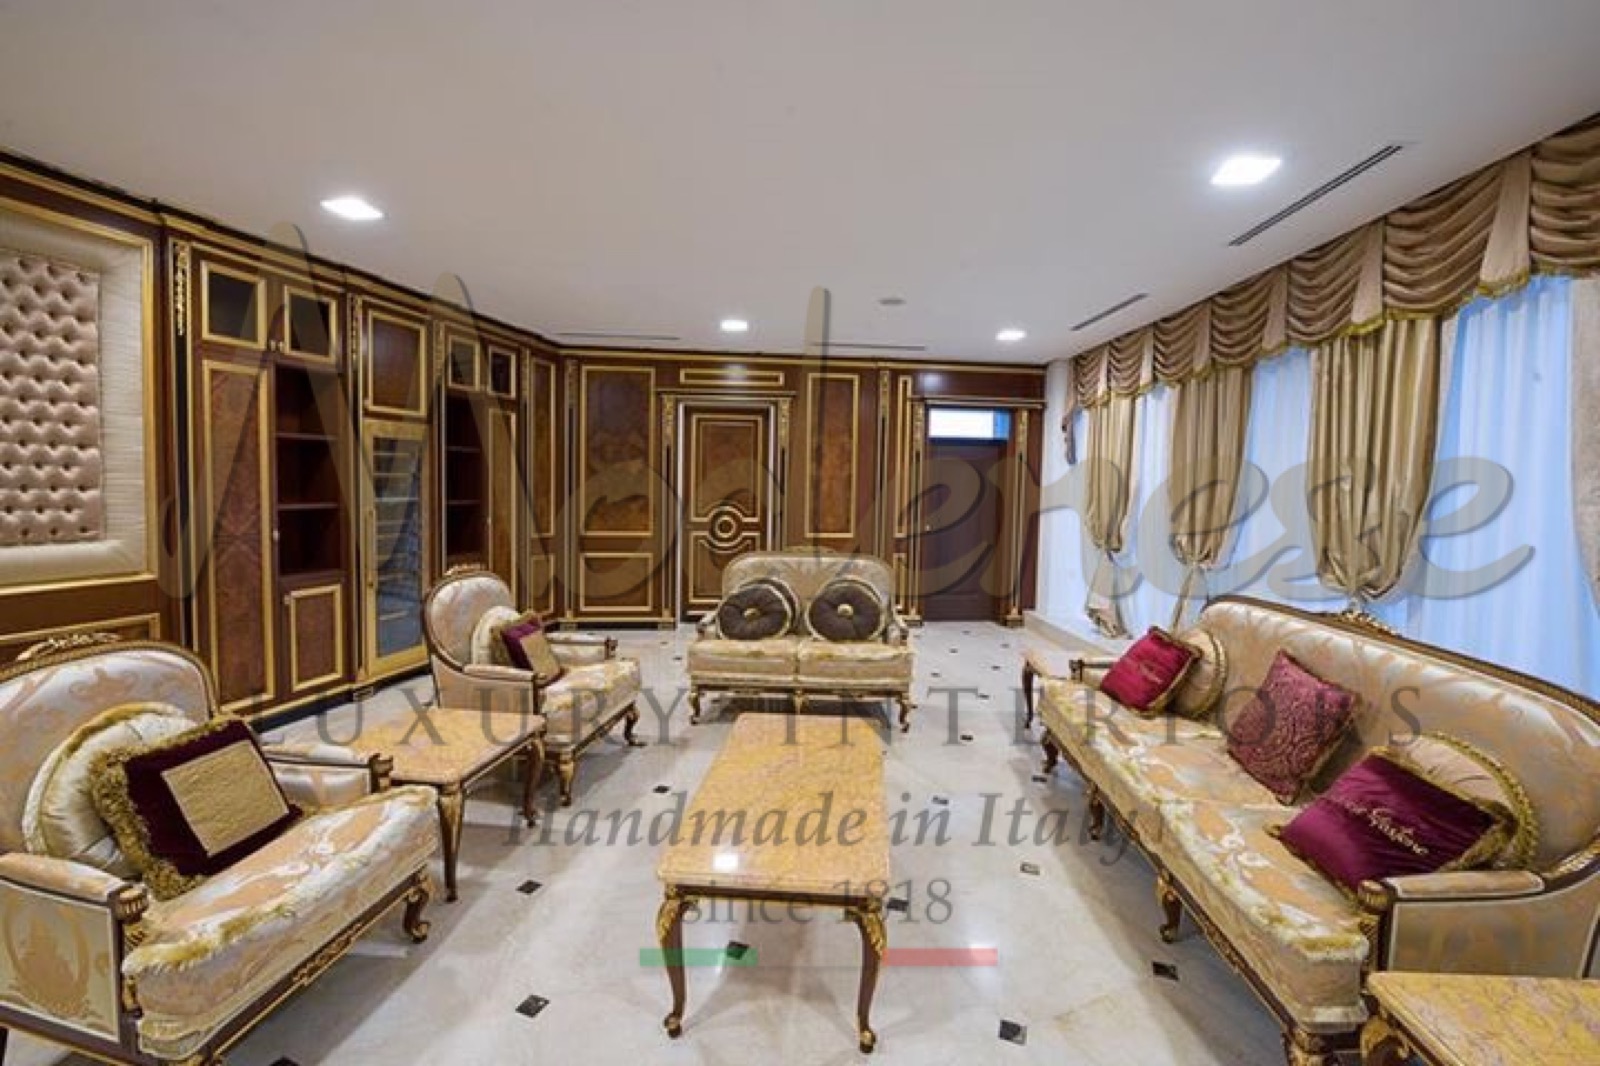 luxury African living villa palace governmental projects interior design studio classic baroque made in Italy furniture African Abuja Nigeria high-end living classy style showroom Italian home decoration gold décor